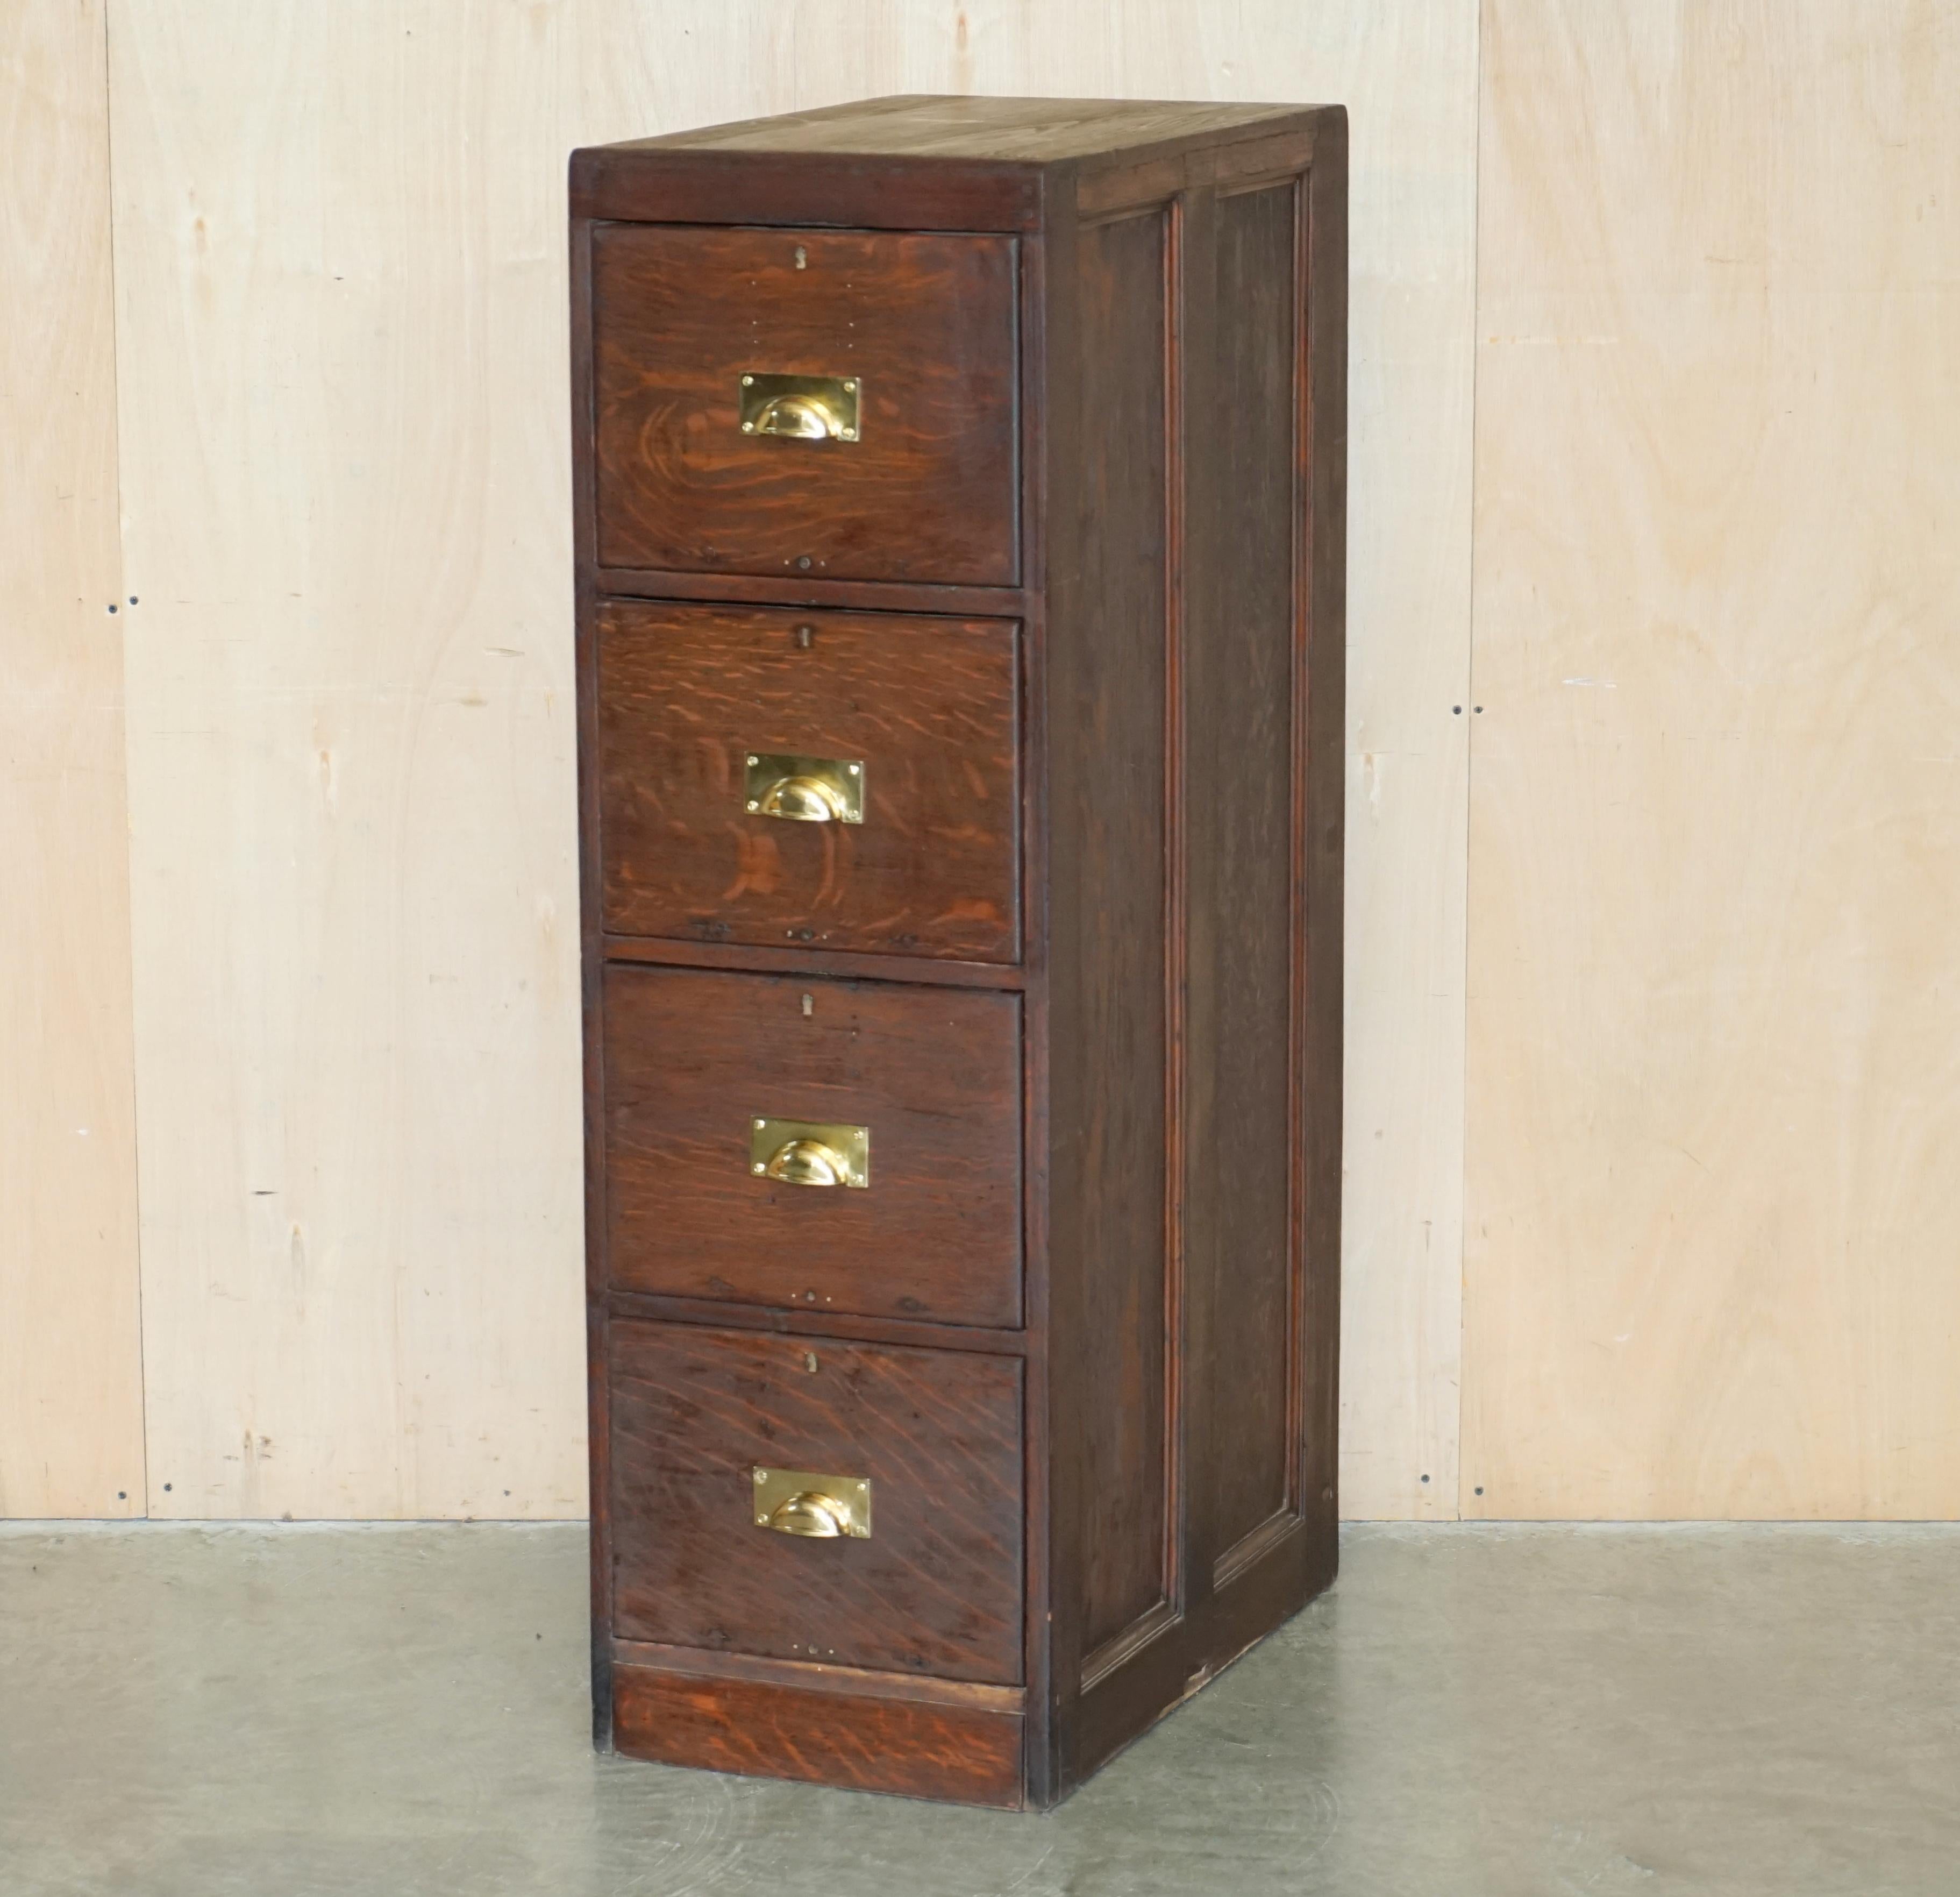 Royal House Antiques

Royal House Antiques is delighted to offer for sale this stunning fully restored antique circa 1920's English oak filing cabinet 

Please note the delivery fee listed is just a guide, it covers within the M25 only for the UK